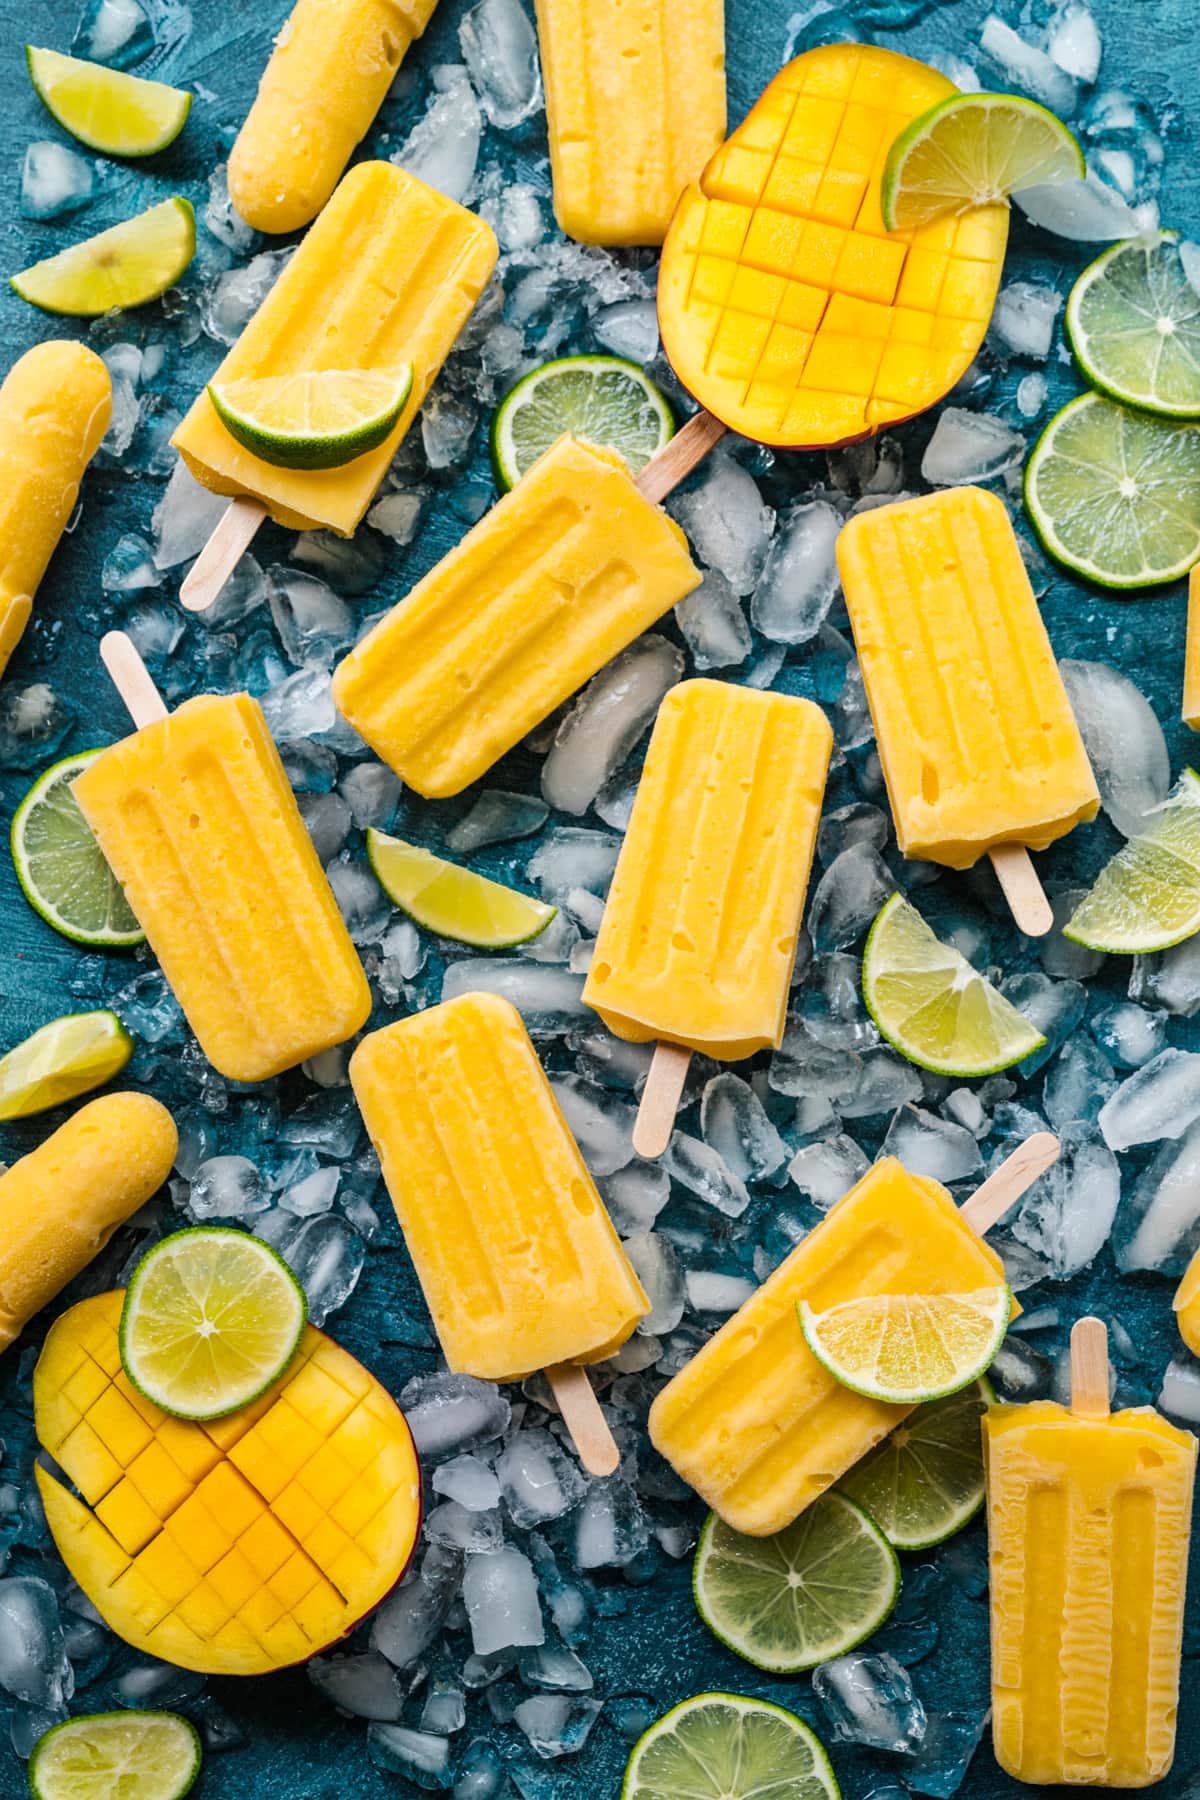 Overhead view of mango popsicles on a blue background, with ice and limes surrounding them.